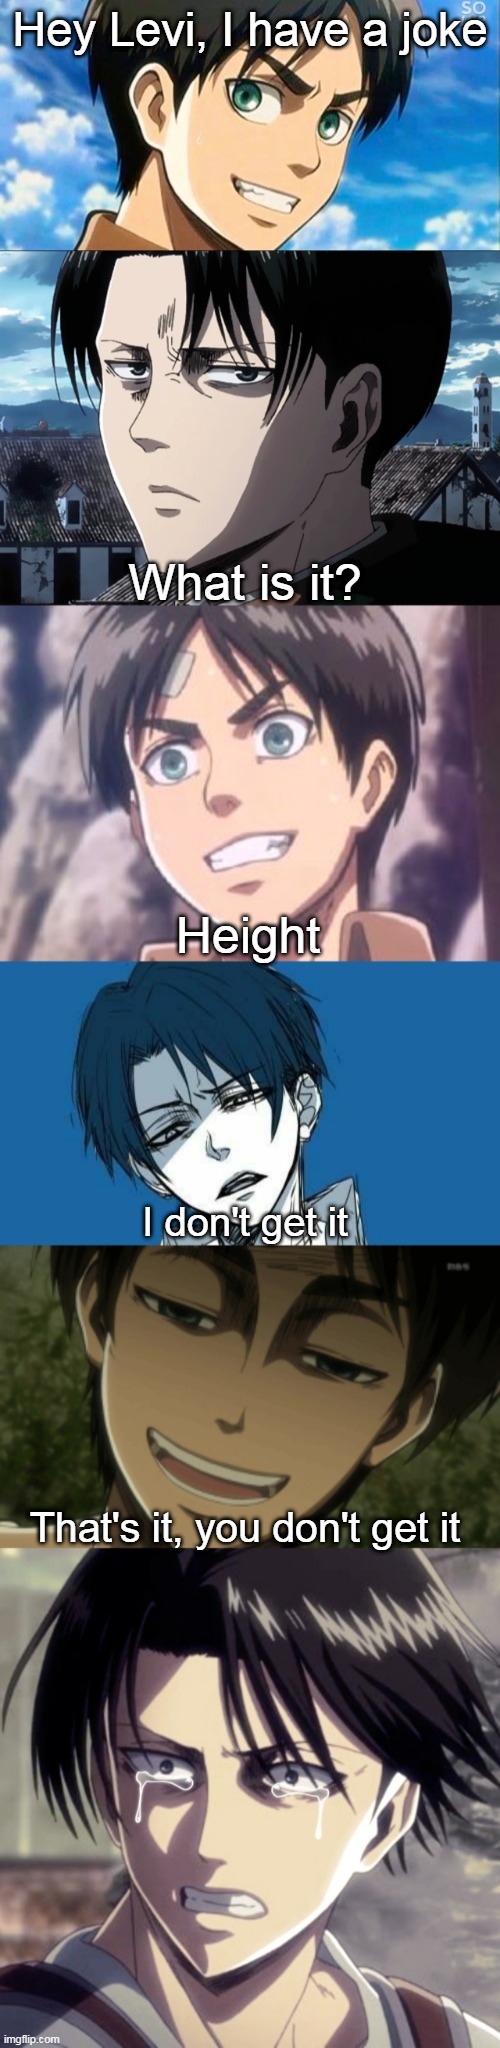 Roast | Hey Levi, I have a joke; What is it? Height; I don't get it; That's it, you don't get it | image tagged in aot,attack on titan,levi,short levi | made w/ Imgflip meme maker